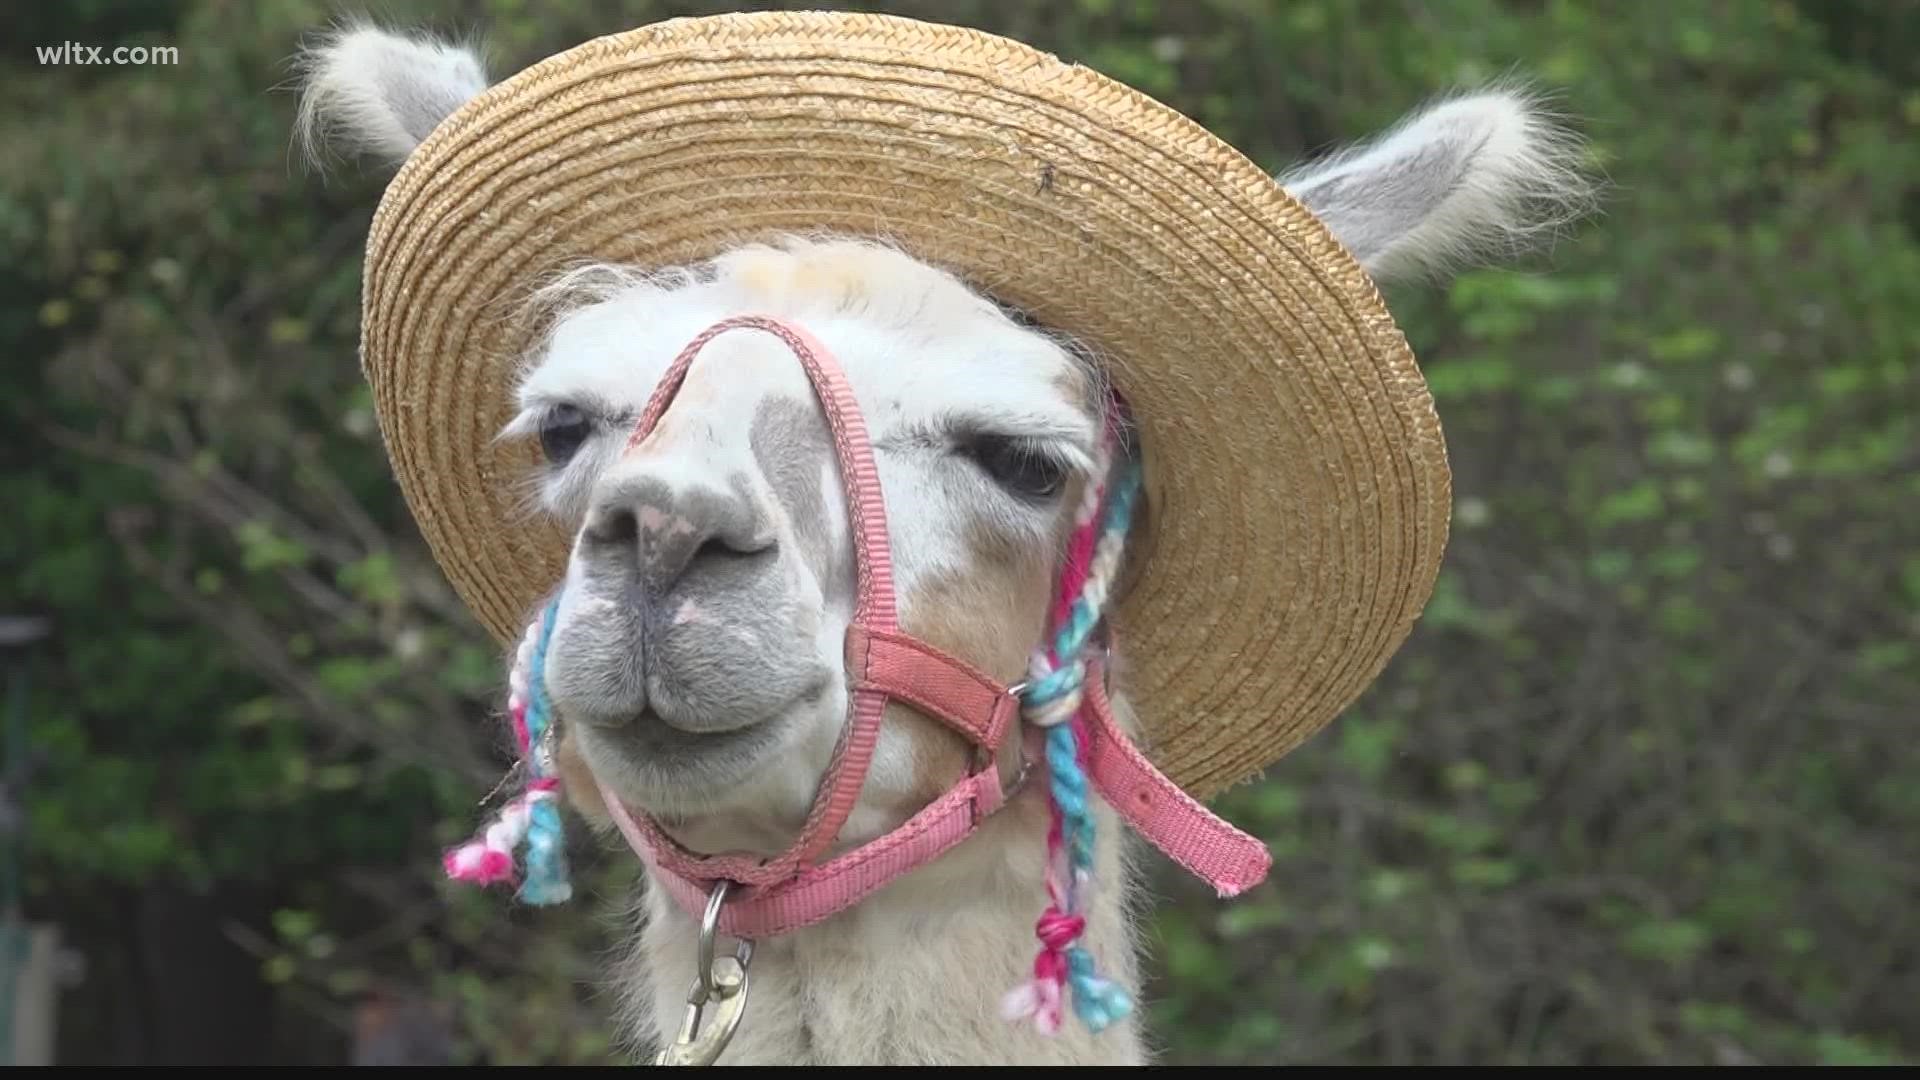 Margie Johnson is the Southeast Llama Rescue South Carolina Coordinator. With the rising cost of feed and hay, she's prepared for an increased need for rehoming.